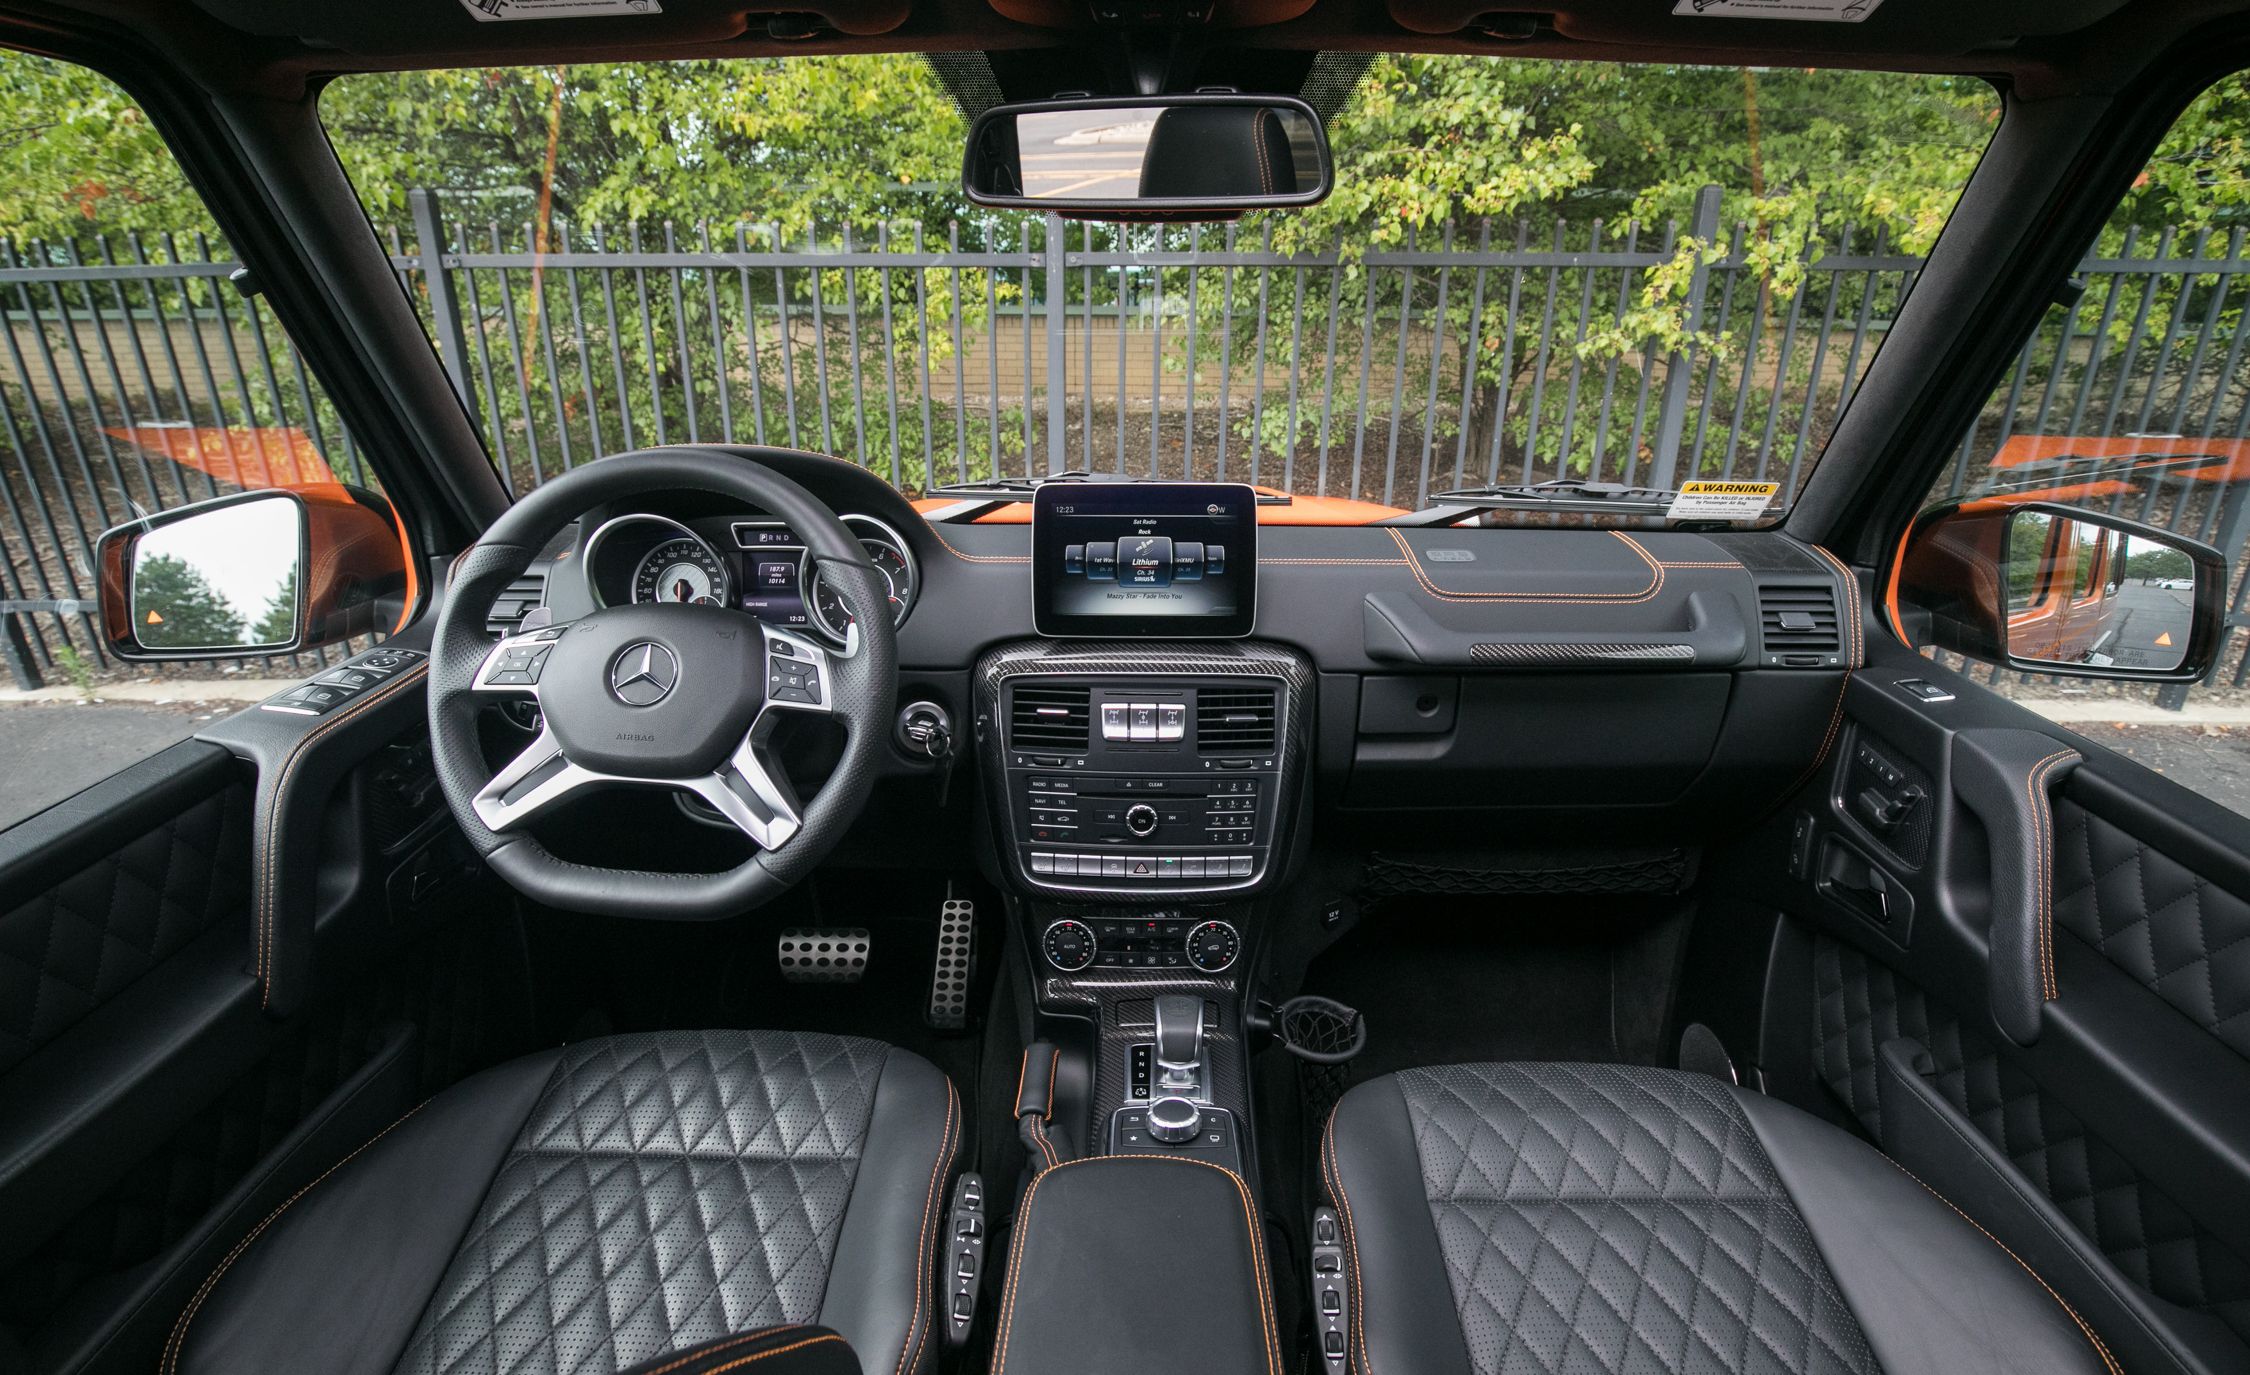 2017 Mercedes G-Class interior allegedly leaked